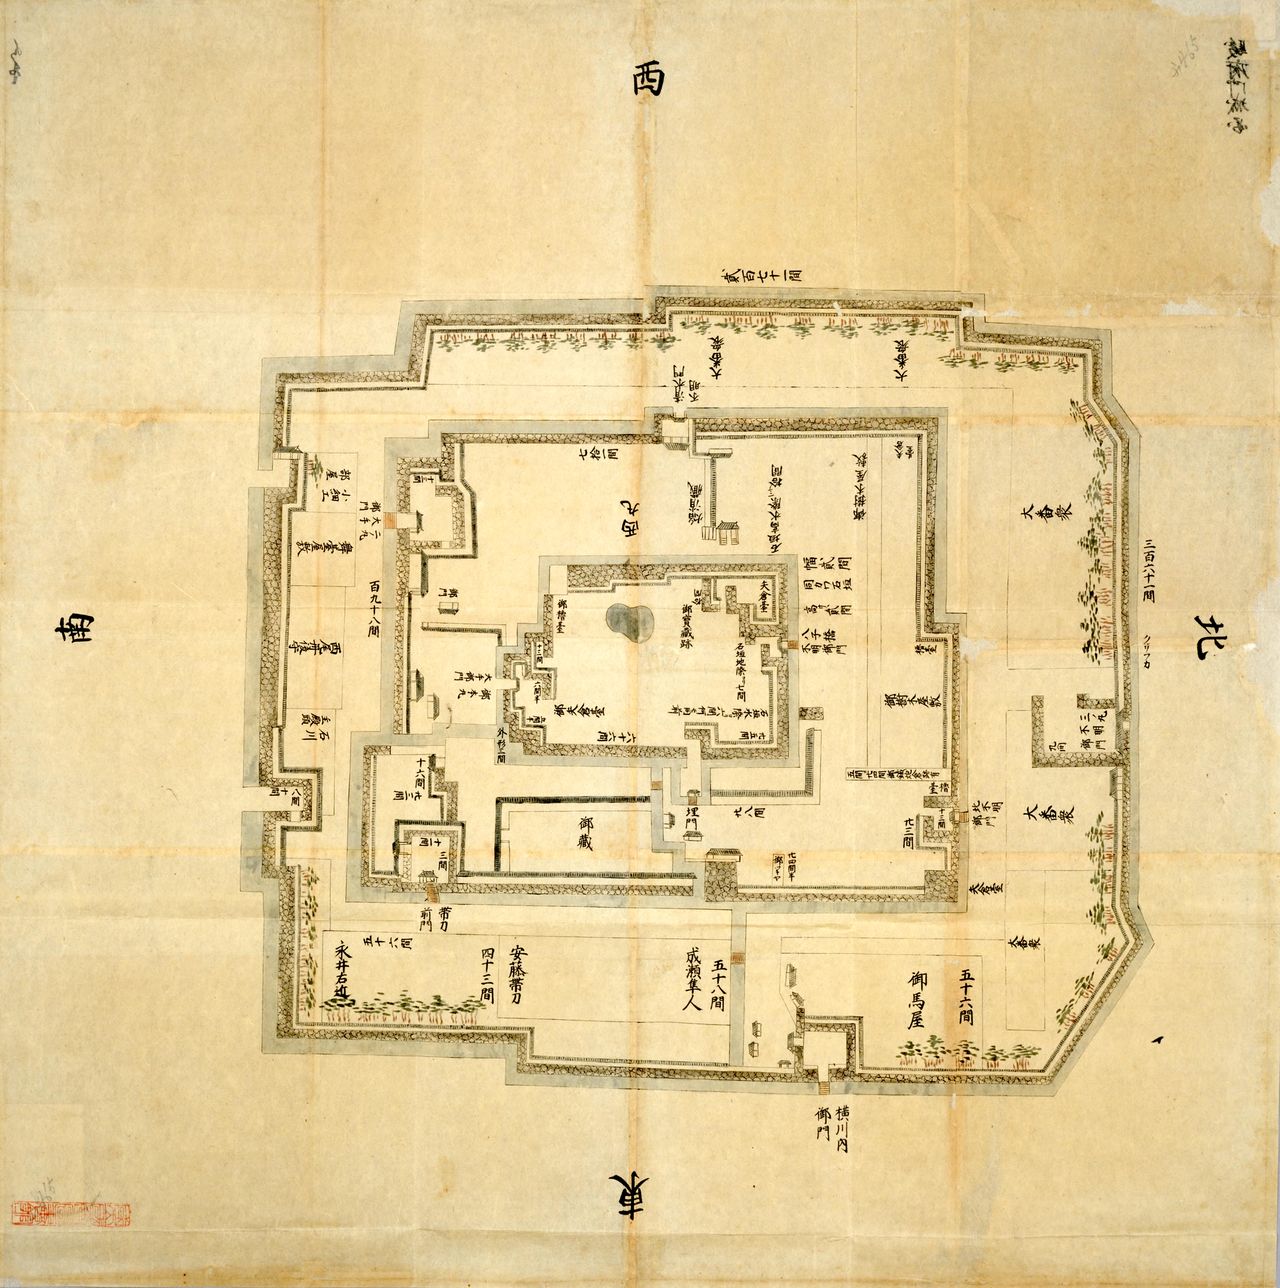 A plan of Sunpu Castle, included in Nihon kojō ezu (Plans of Old Japanese Castles). This was drawn up in the mid-Edo period (1603–1868), after Ieyasu lived there, showing a large castle built up around a longstanding central keep. (Courtesy the National Diet Library)